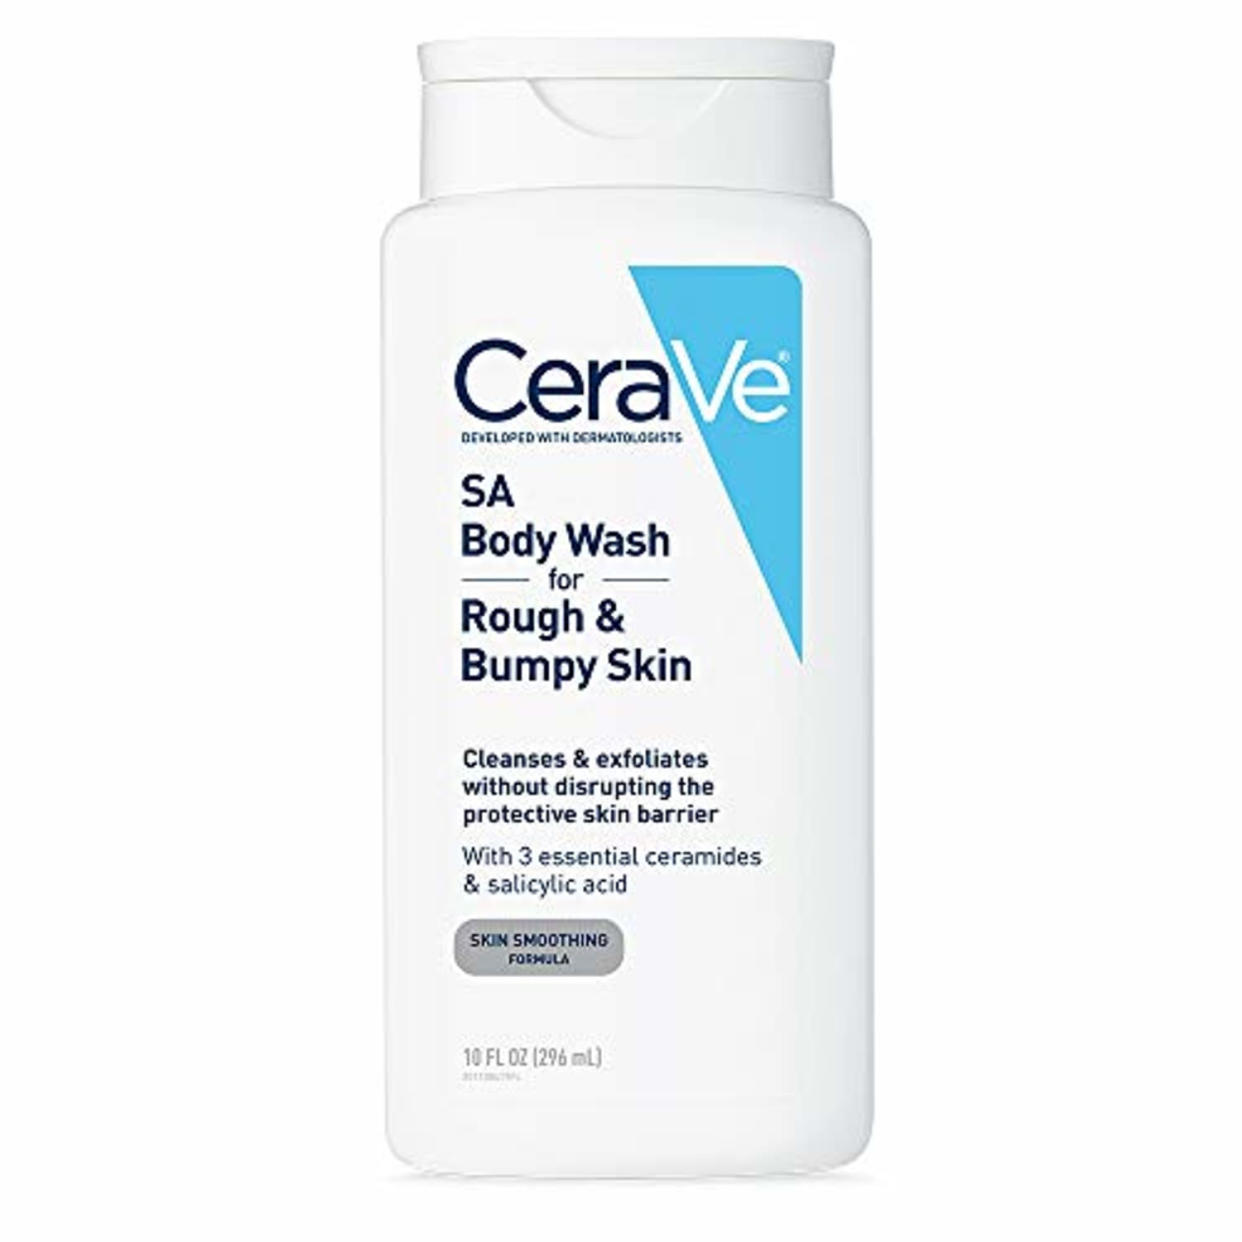 CeraVe Body Wash with Salicylic Acid | Fragrance Free Body Wash to Exfoliate Rough and Bumpy Skin | Allergy Tested | 10 Ounce (AMAZON)